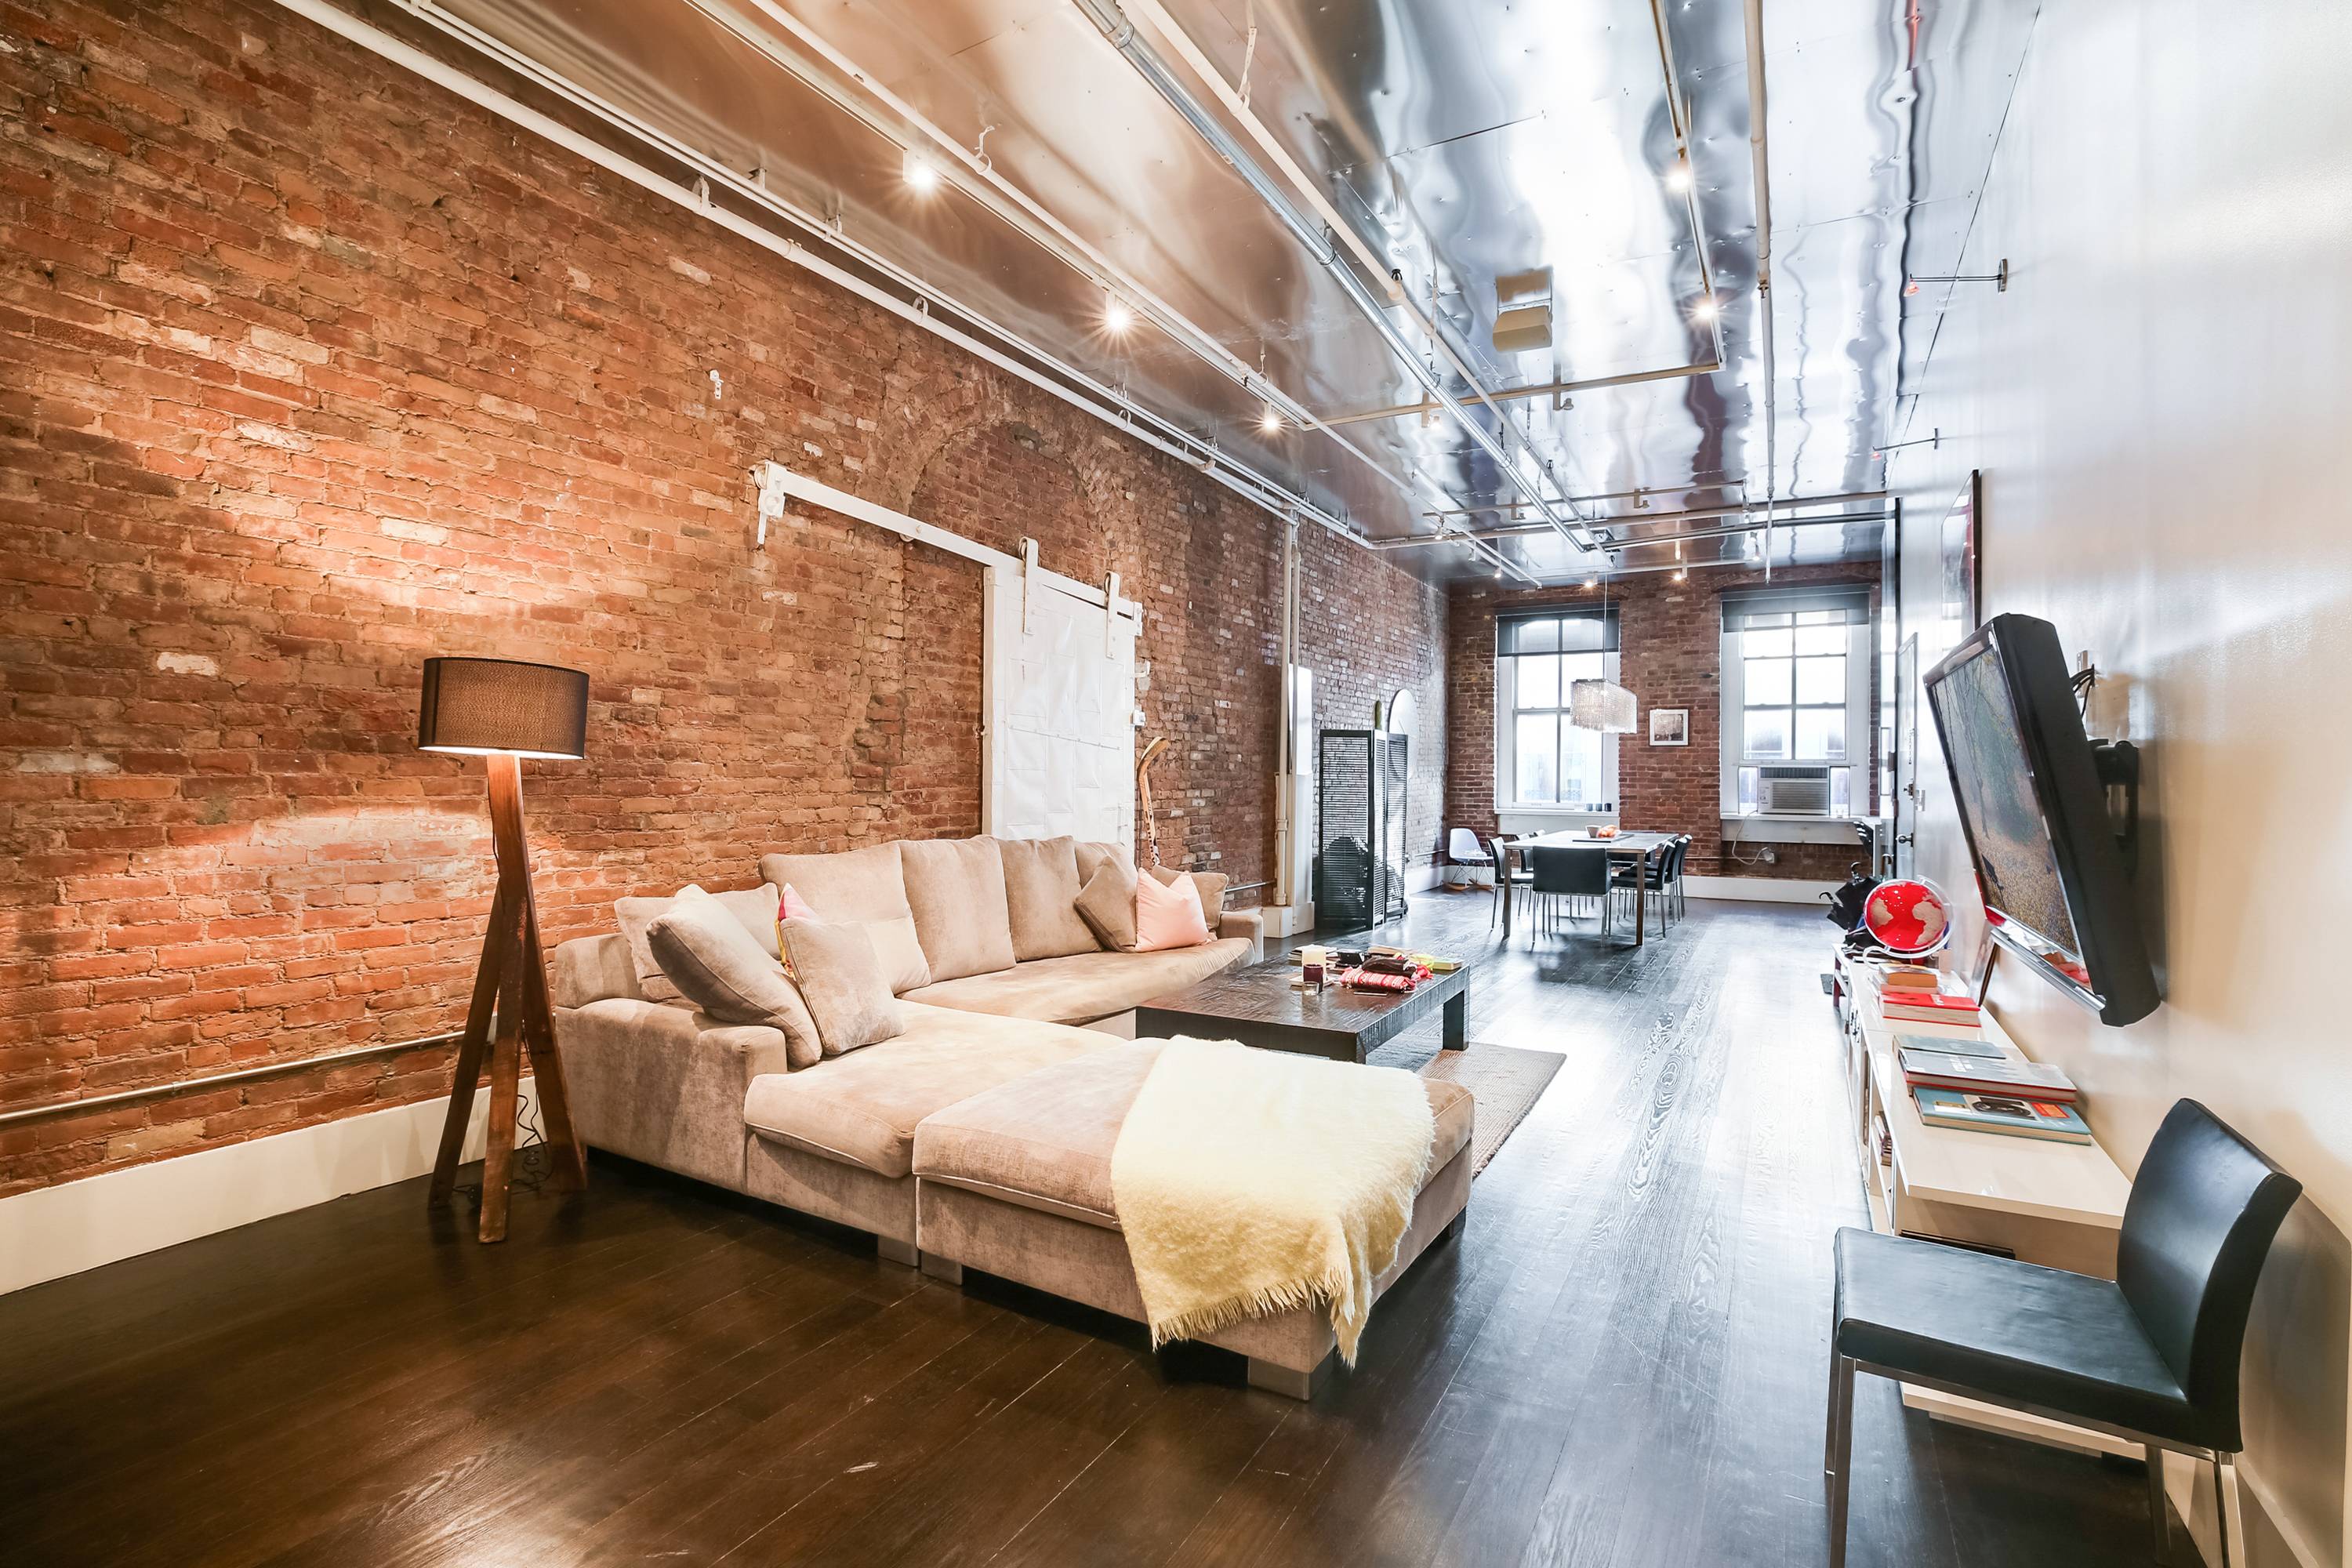 True SOHO 1 Bed/1.5 Bath Loft  and Beautiful Finishes Throughout! AMAZING Space!